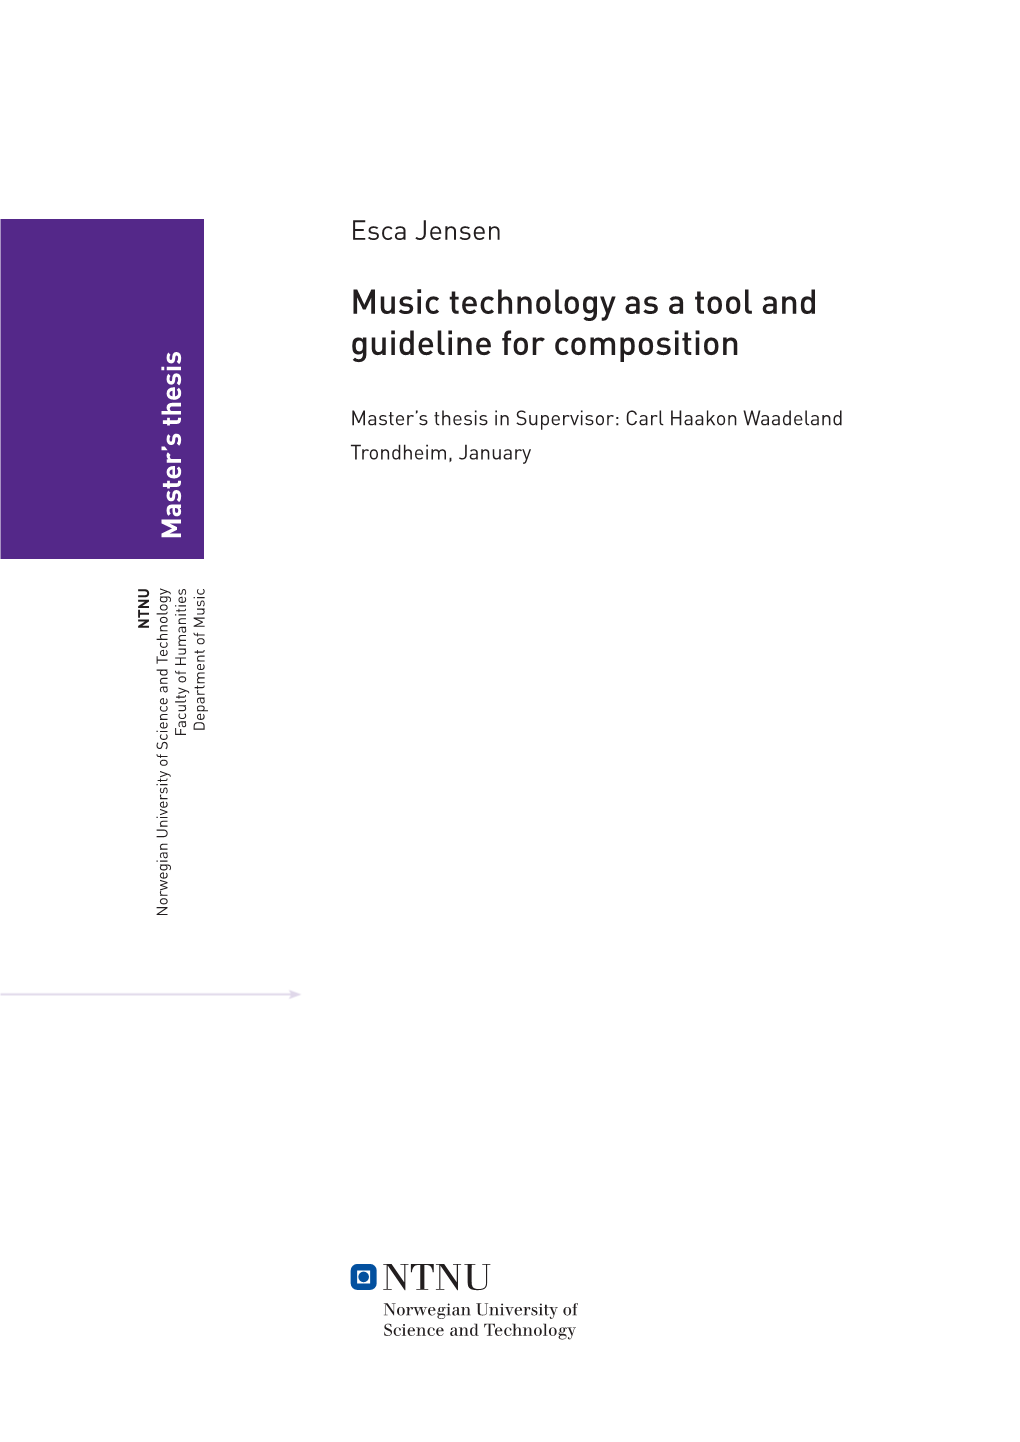 Music Technology As a Tool and Guideline for Composition